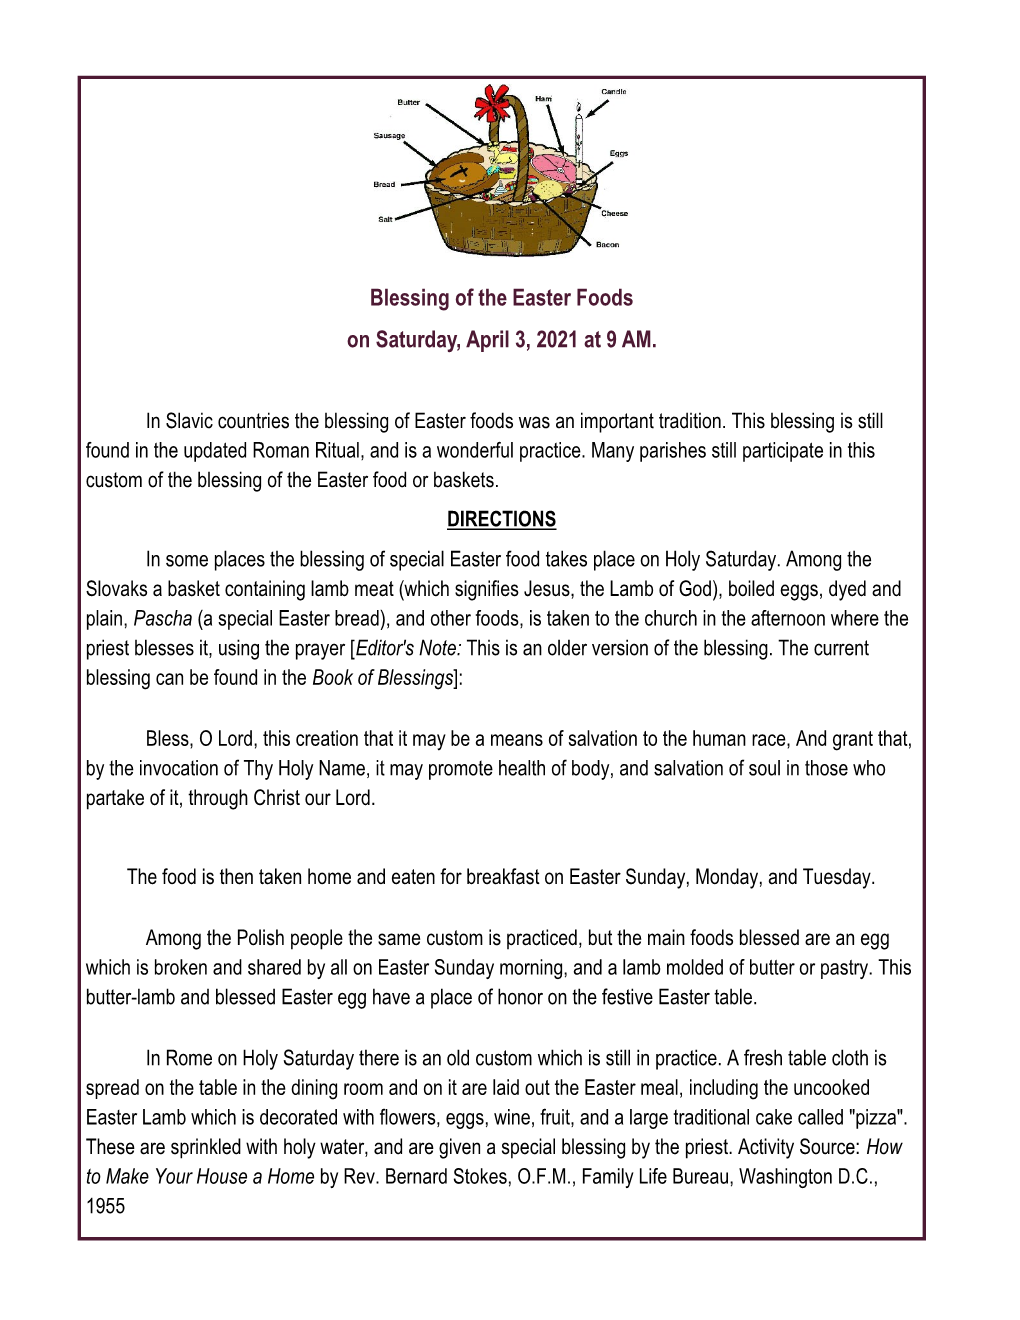 Blessing of the Easter Foods on Saturday, April 3, 2021 at 9 AM